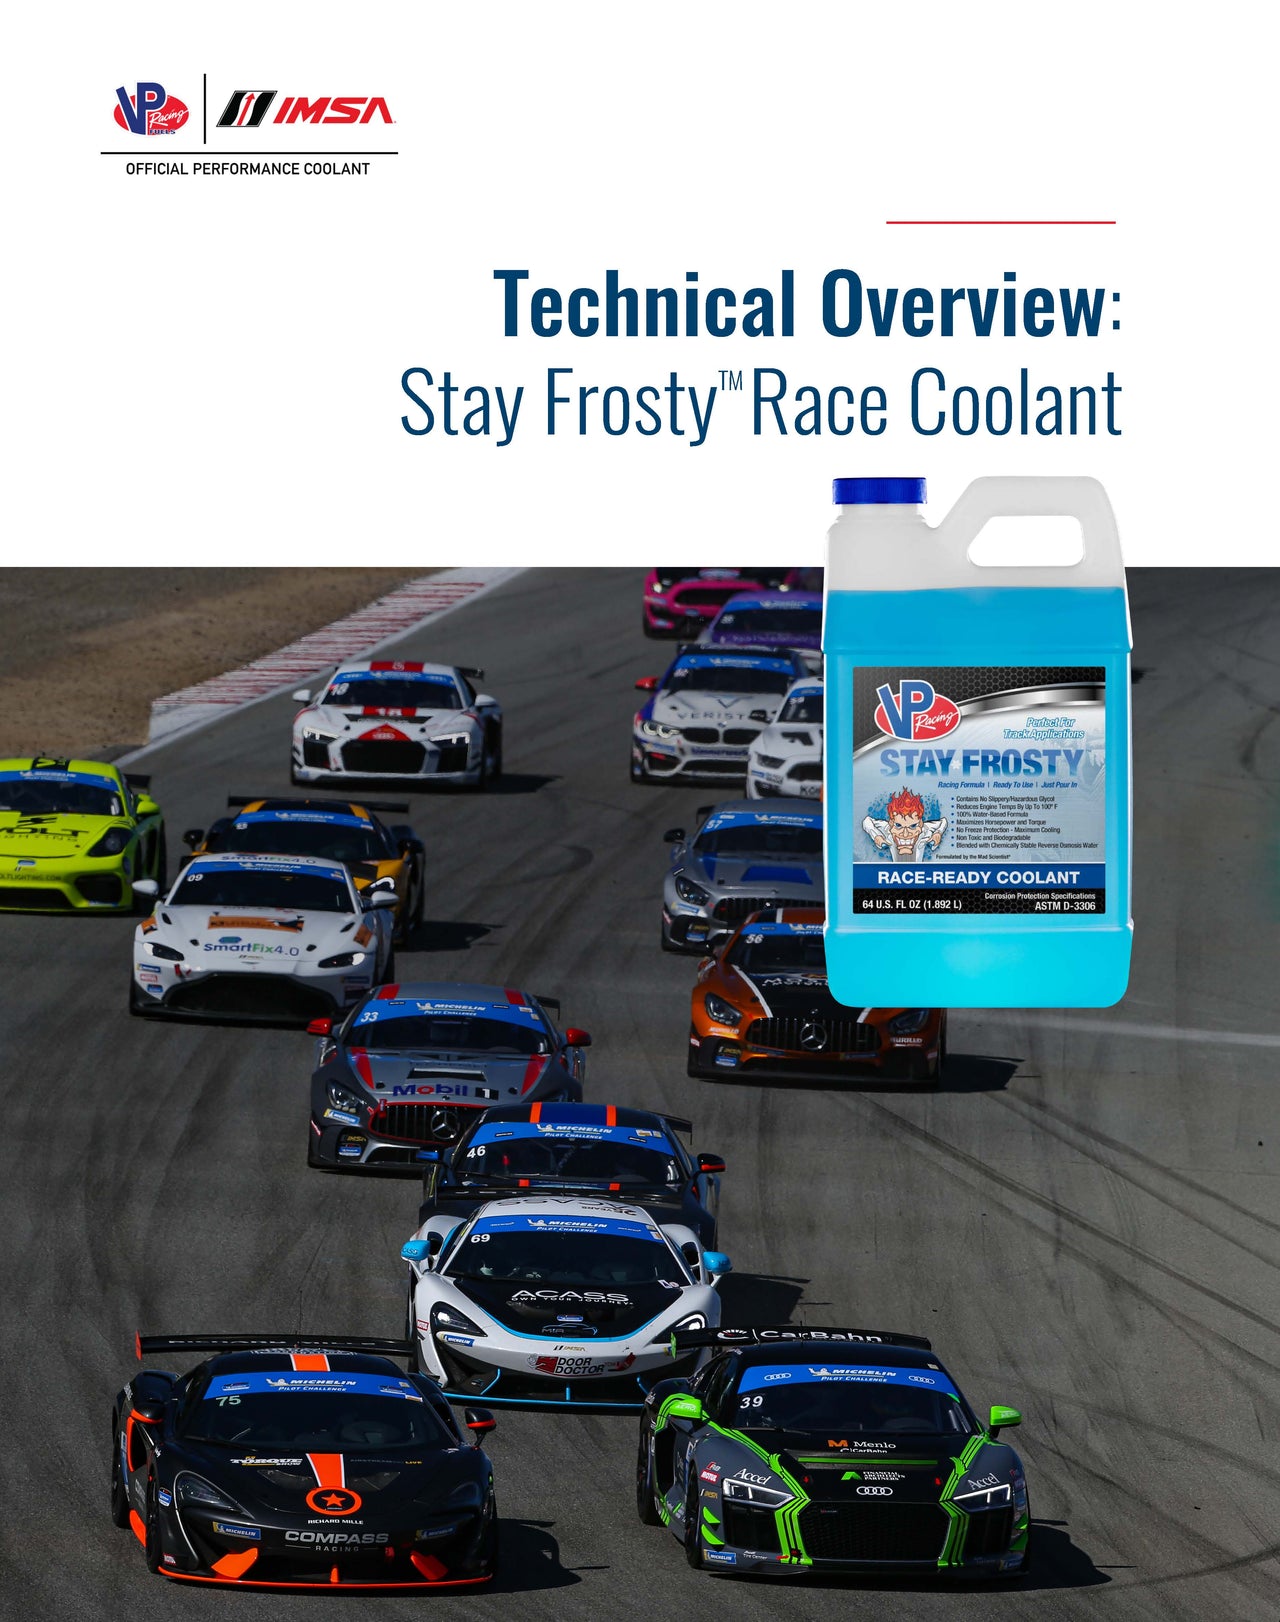 TECHNICAL OVERVIEW: STAY FROSTY RACE COOLAN